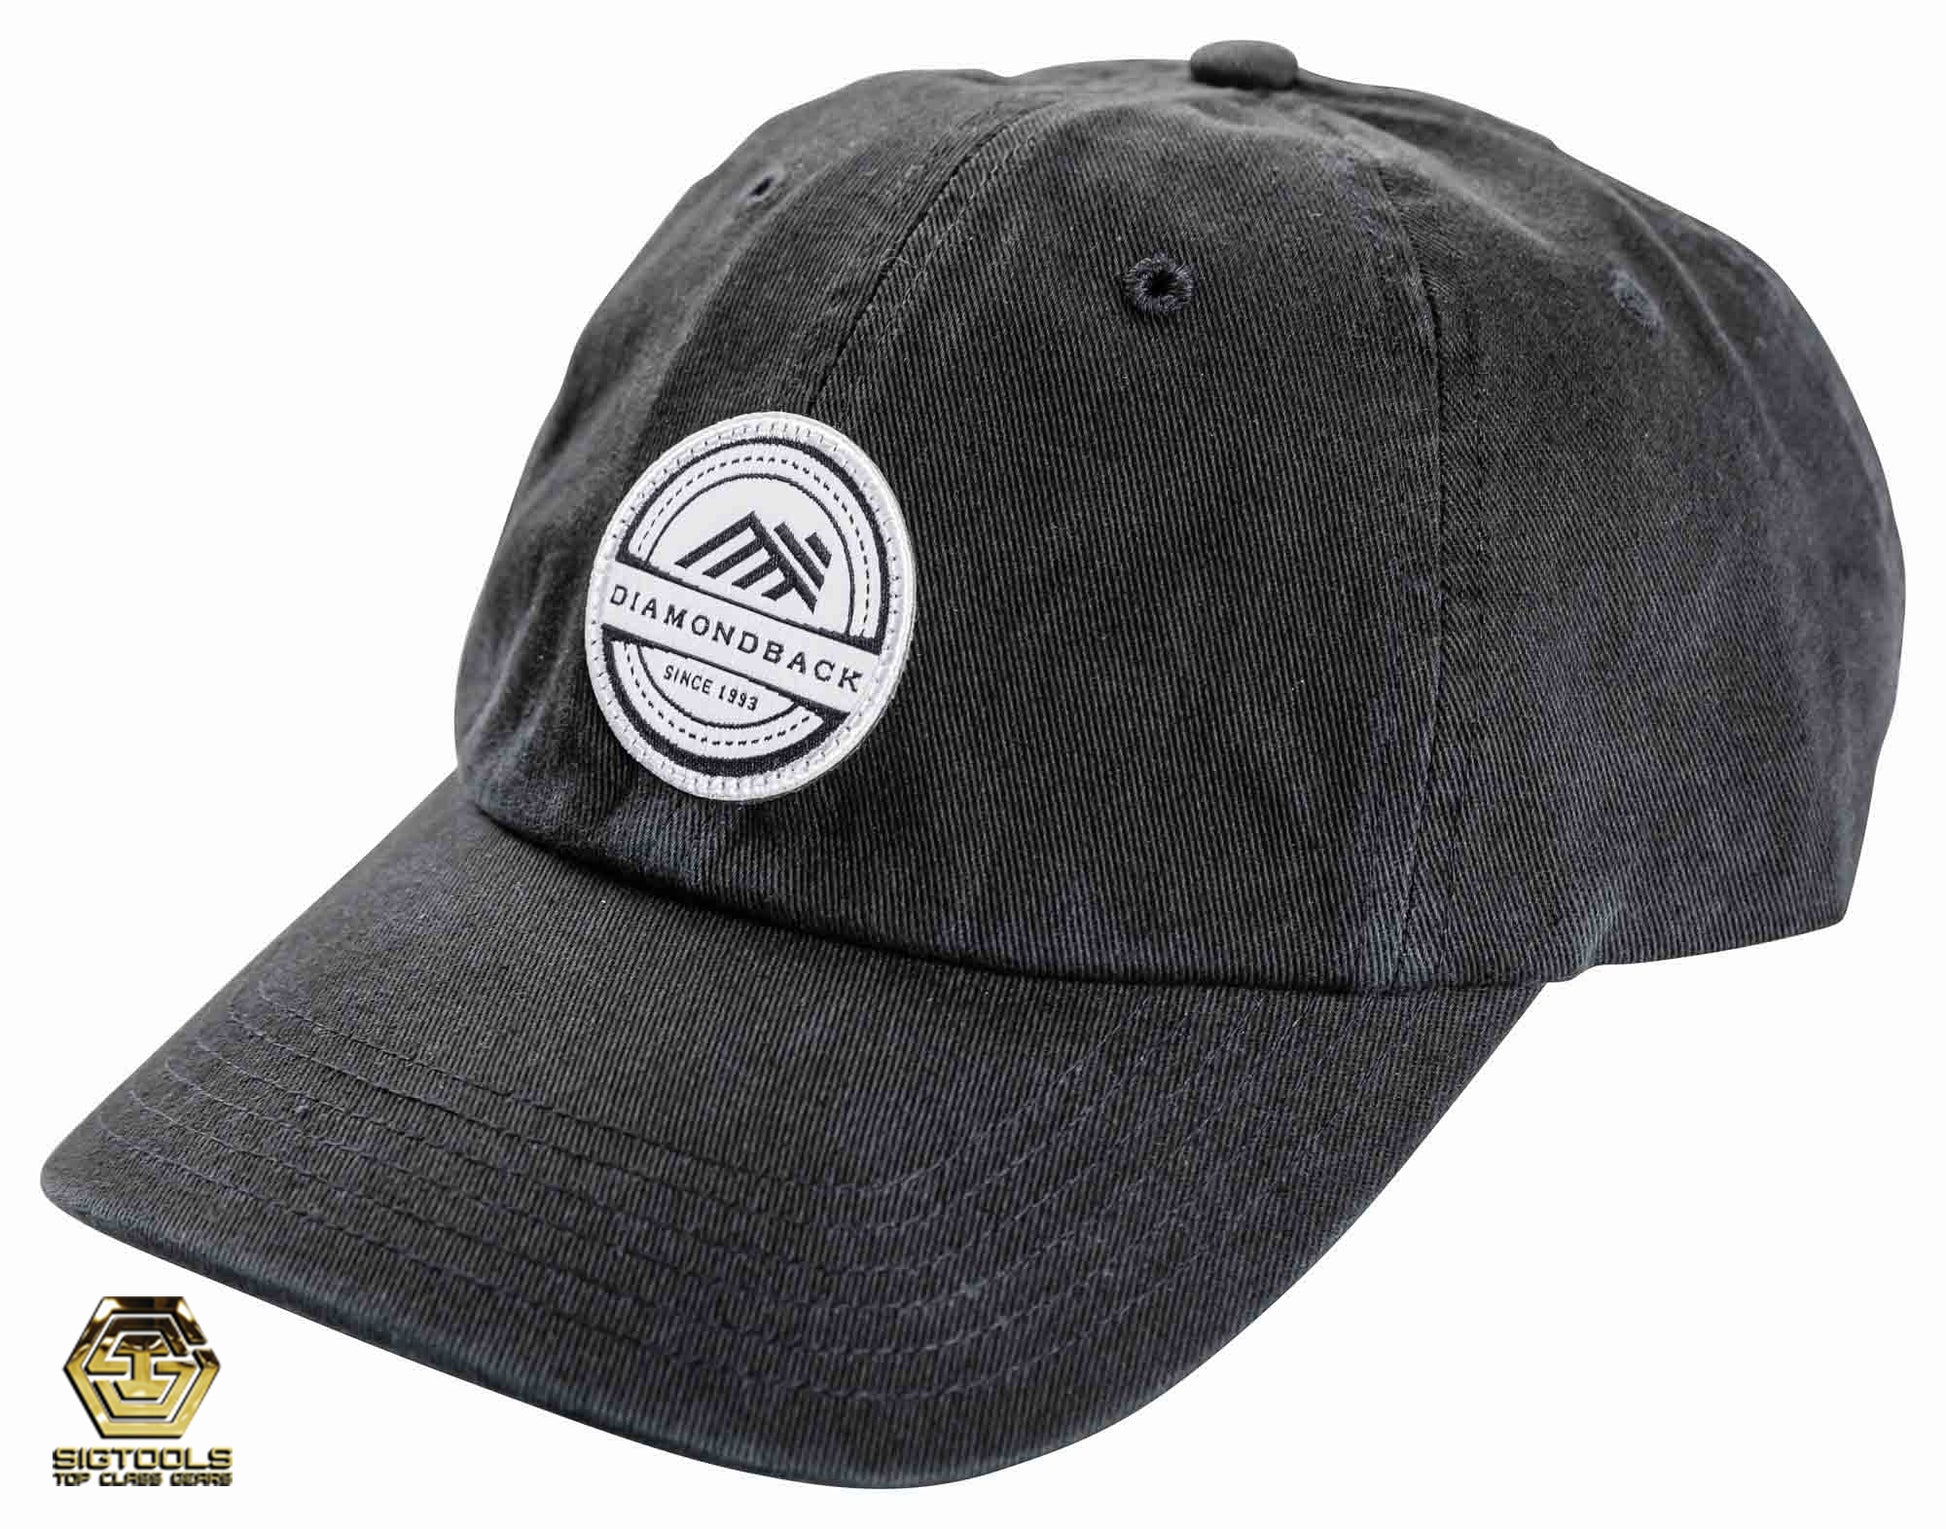  A front view of a Diamondback dad hat with a Black and white logo, a stylish accessory for fans of the brand.